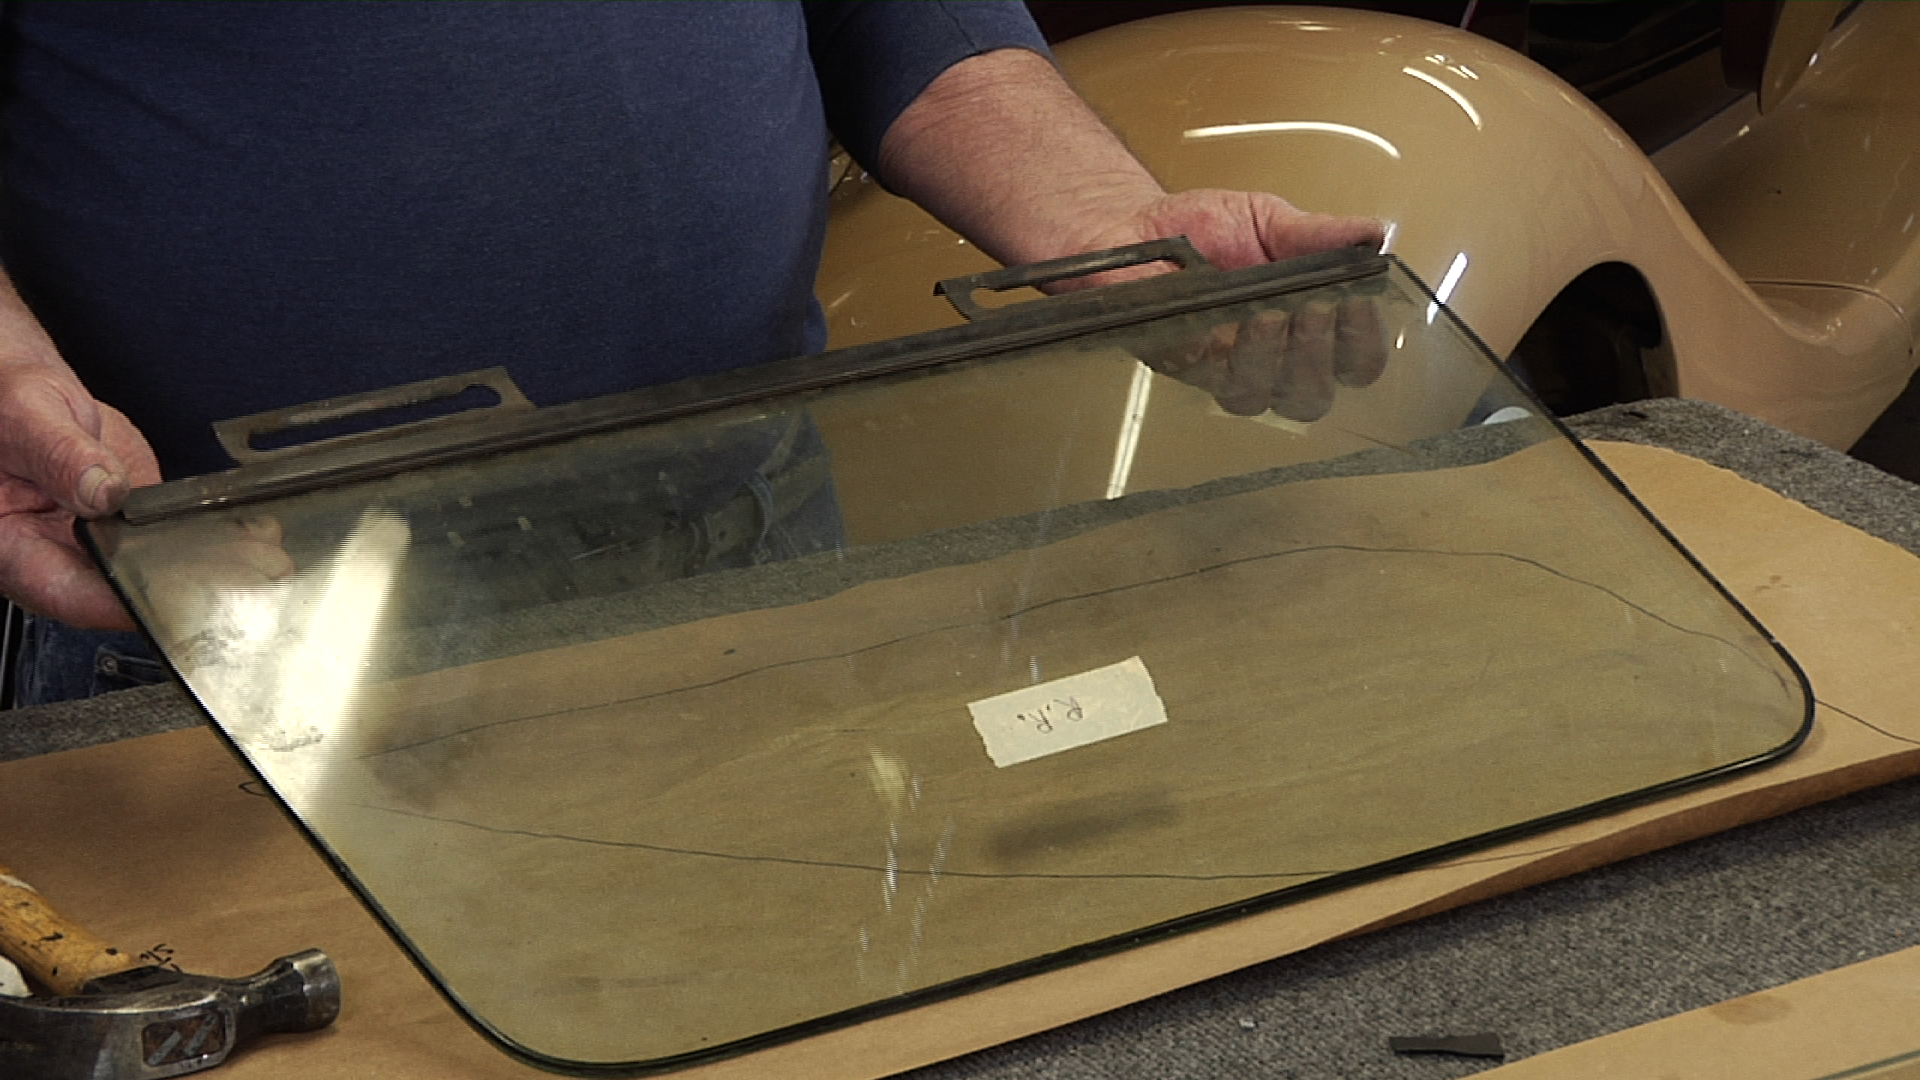 Replacing Glass Channels on a 1935 Studebaker product featured image thumbnail.